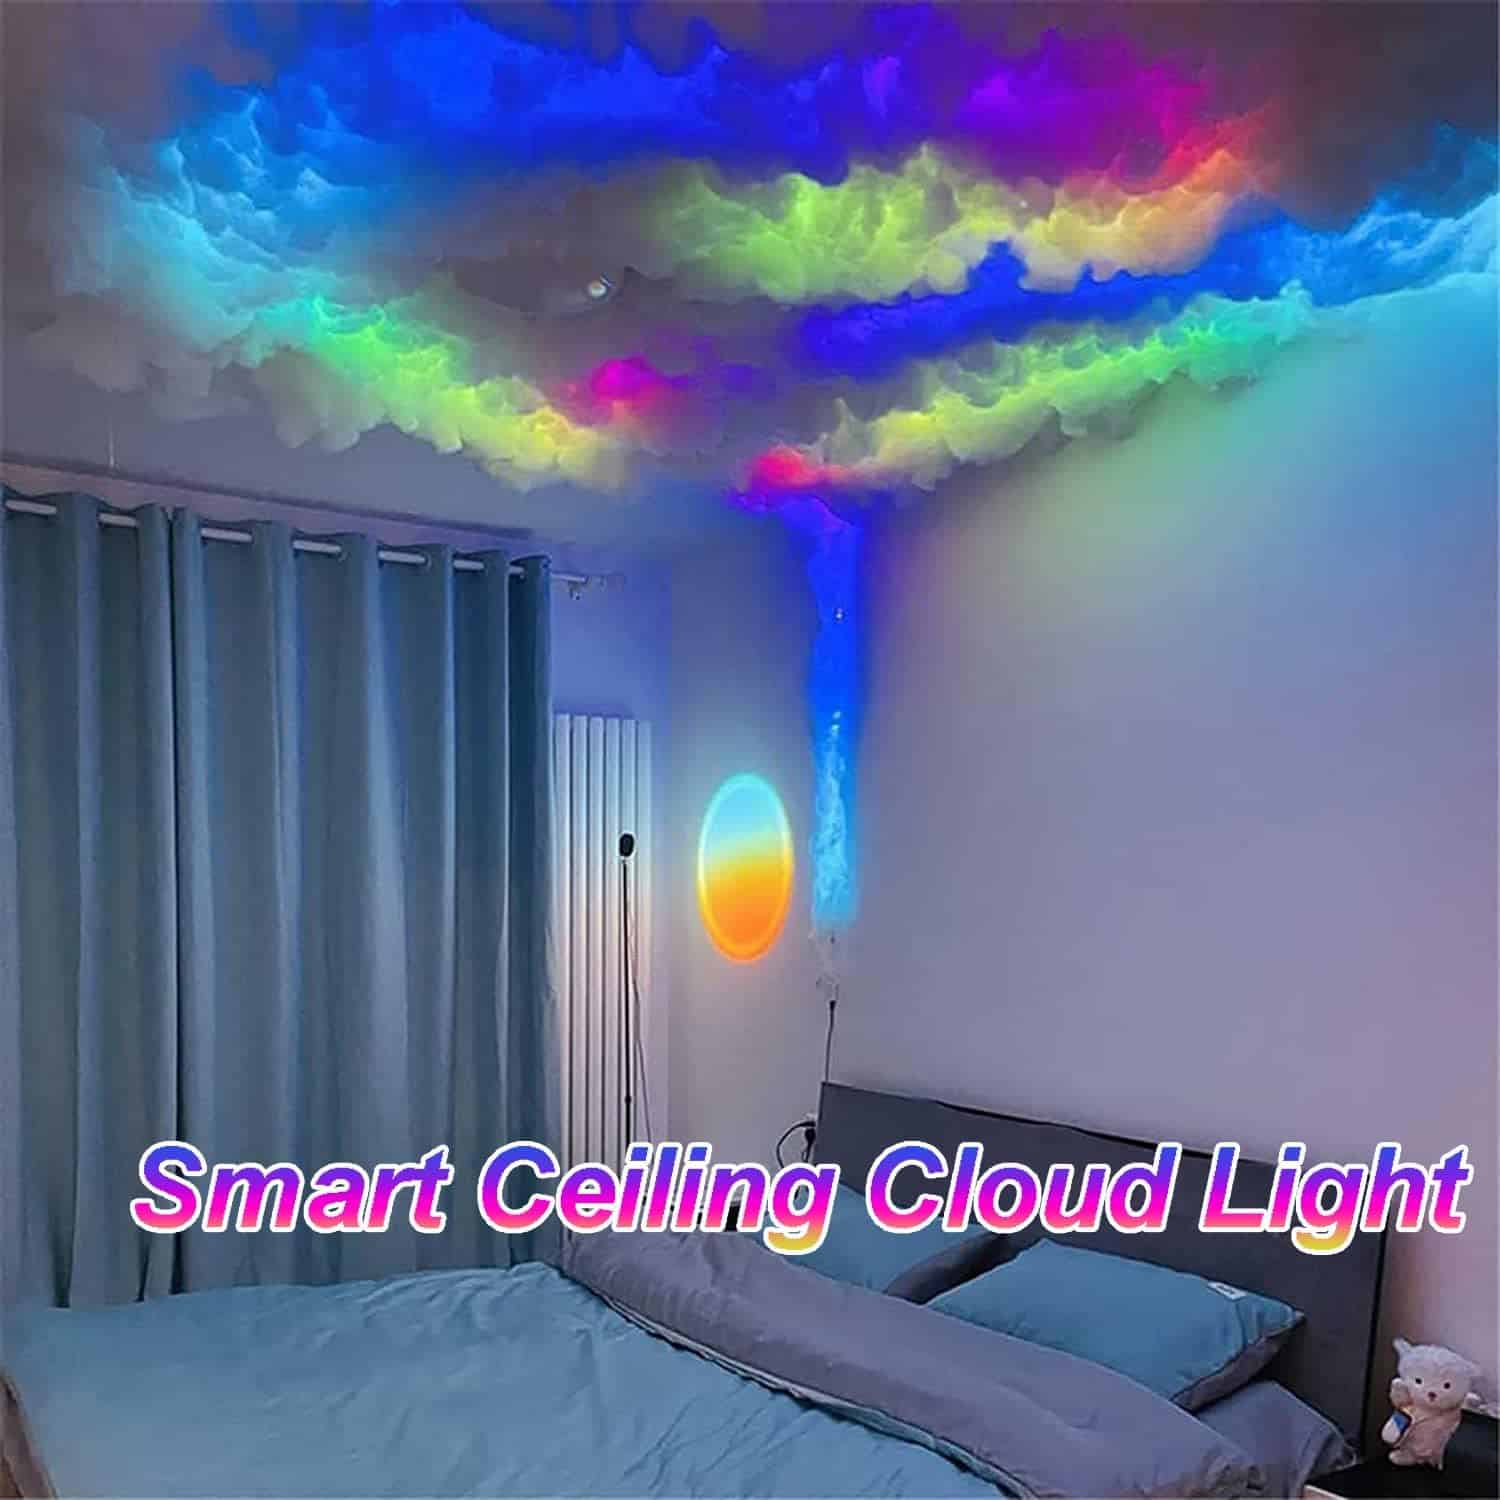 Cloud Lights for Ceiling, Cloud Led Lights, 3D Cotton Cloud Lights, Fluffy Ceiling Cloud Night Lamp, Led Clouds Christmas Halloween Decoration, for Gaming Room, Bar, Party, Bedroom (10M)